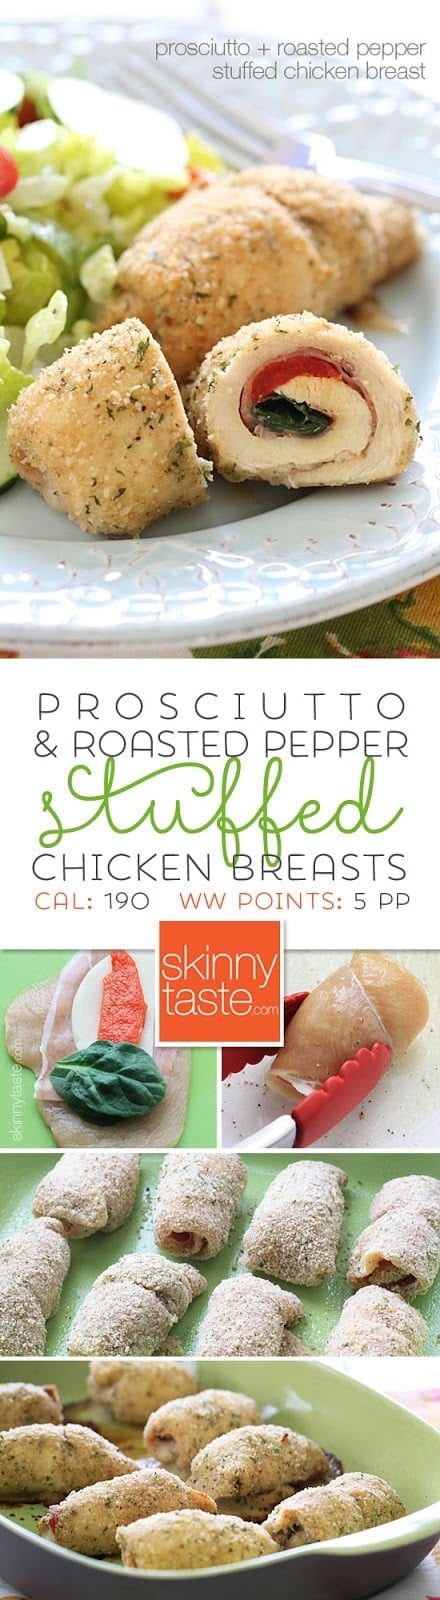 Roasted Red Pepper and Prosciutto Stuffed Chicken Breast – baked, not fried and they are easy to make!